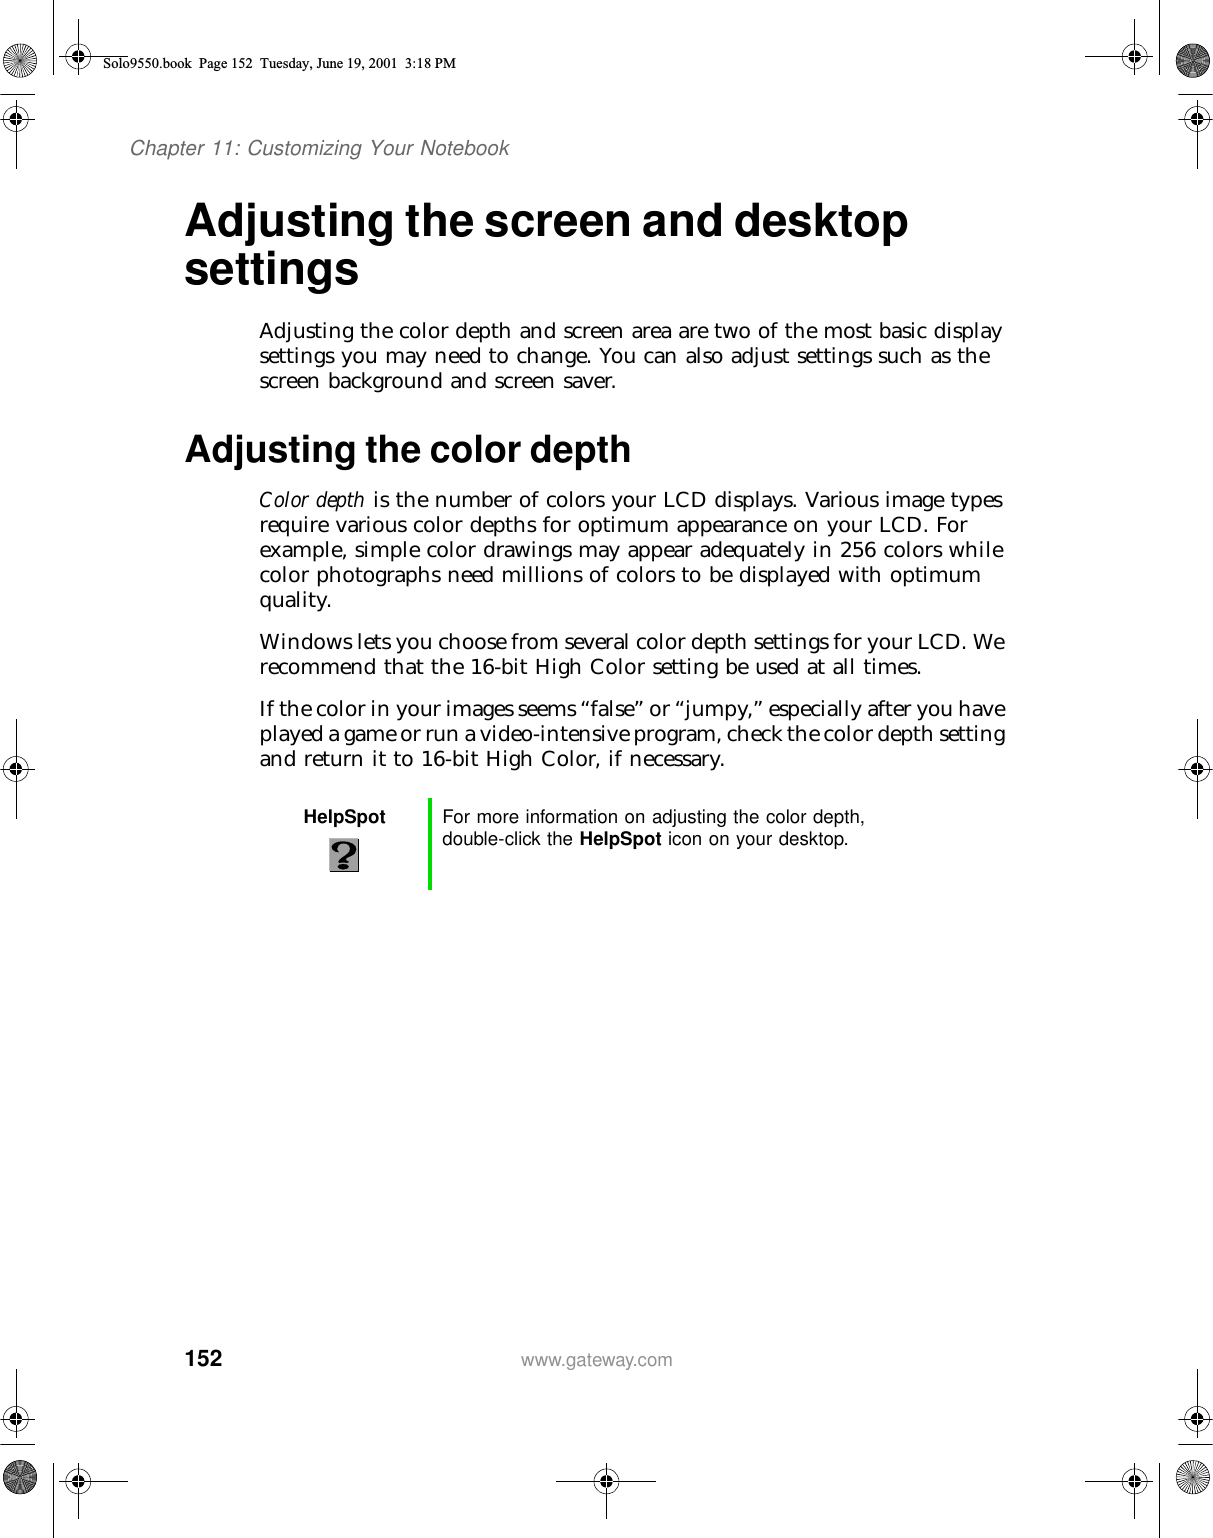 152Chapter 11: Customizing Your Notebookwww.gateway.comAdjusting the screen and desktop settingsAdjusting the color depth and screen area are two of the most basic display settings you may need to change. You can also adjust settings such as the screen background and screen saver.Adjusting the color depthColor depth is the number of colors your LCD displays. Various image types require various color depths for optimum appearance on your LCD. For example, simple color drawings may appear adequately in 256 colors while color photographs need millions of colors to be displayed with optimum quality.Windows lets you choose from several color depth settings for your LCD. We recommend that the 16-bit High Color setting be used at all times.If the color in your images seems “false” or “jumpy,” especially after you have played a game or run a video-intensive program, check the color depth setting and return it to 16-bit High Color, if necessary.HelpSpot For more information on adjusting the color depth, double-click the HelpSpot icon on your desktop.Solo9550.book Page 152 Tuesday, June 19, 2001 3:18 PM